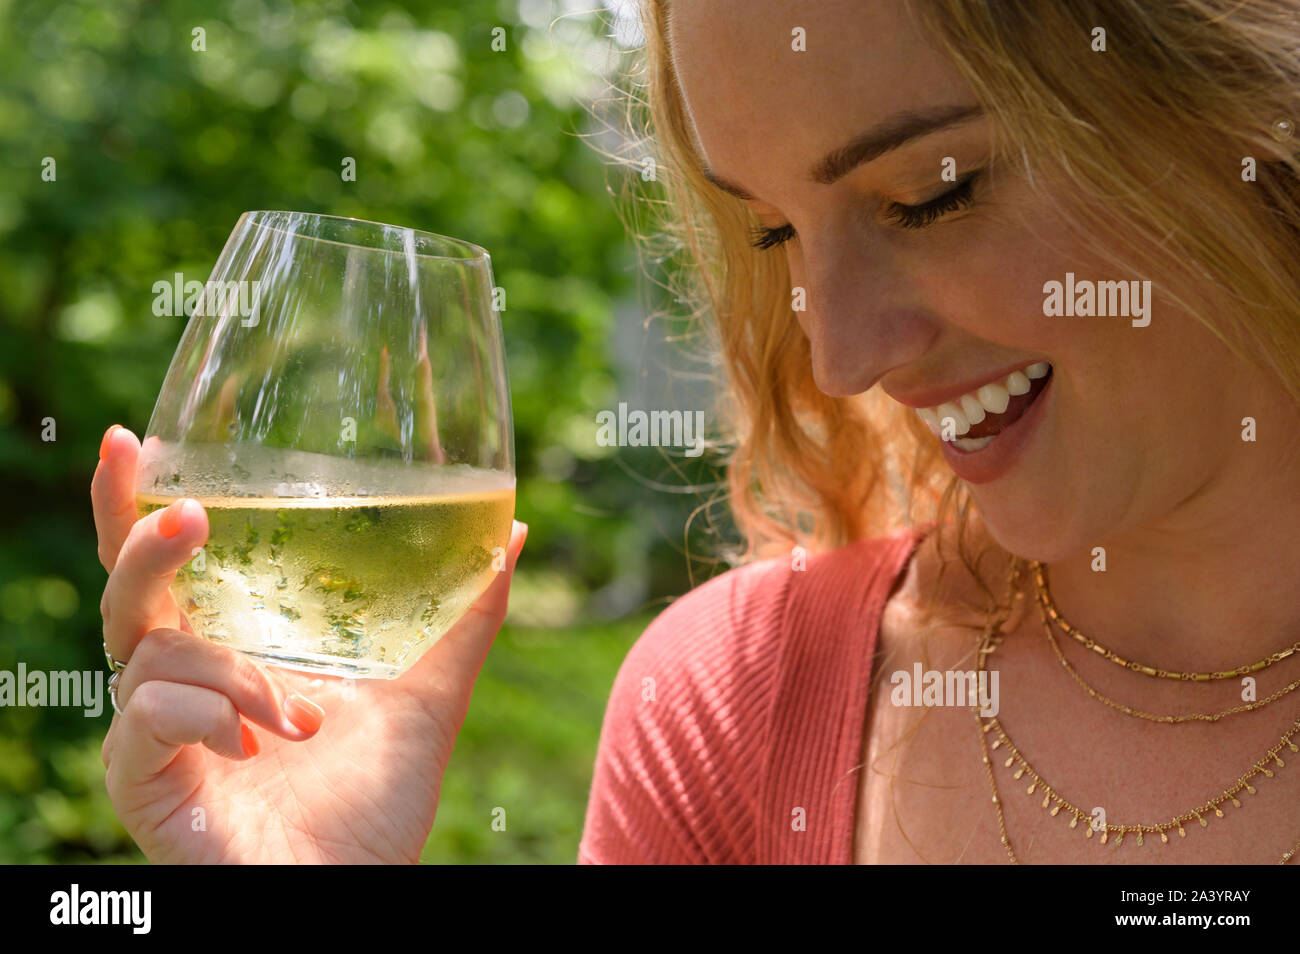 Smiling young woman holding glass of white wine Stock Photo